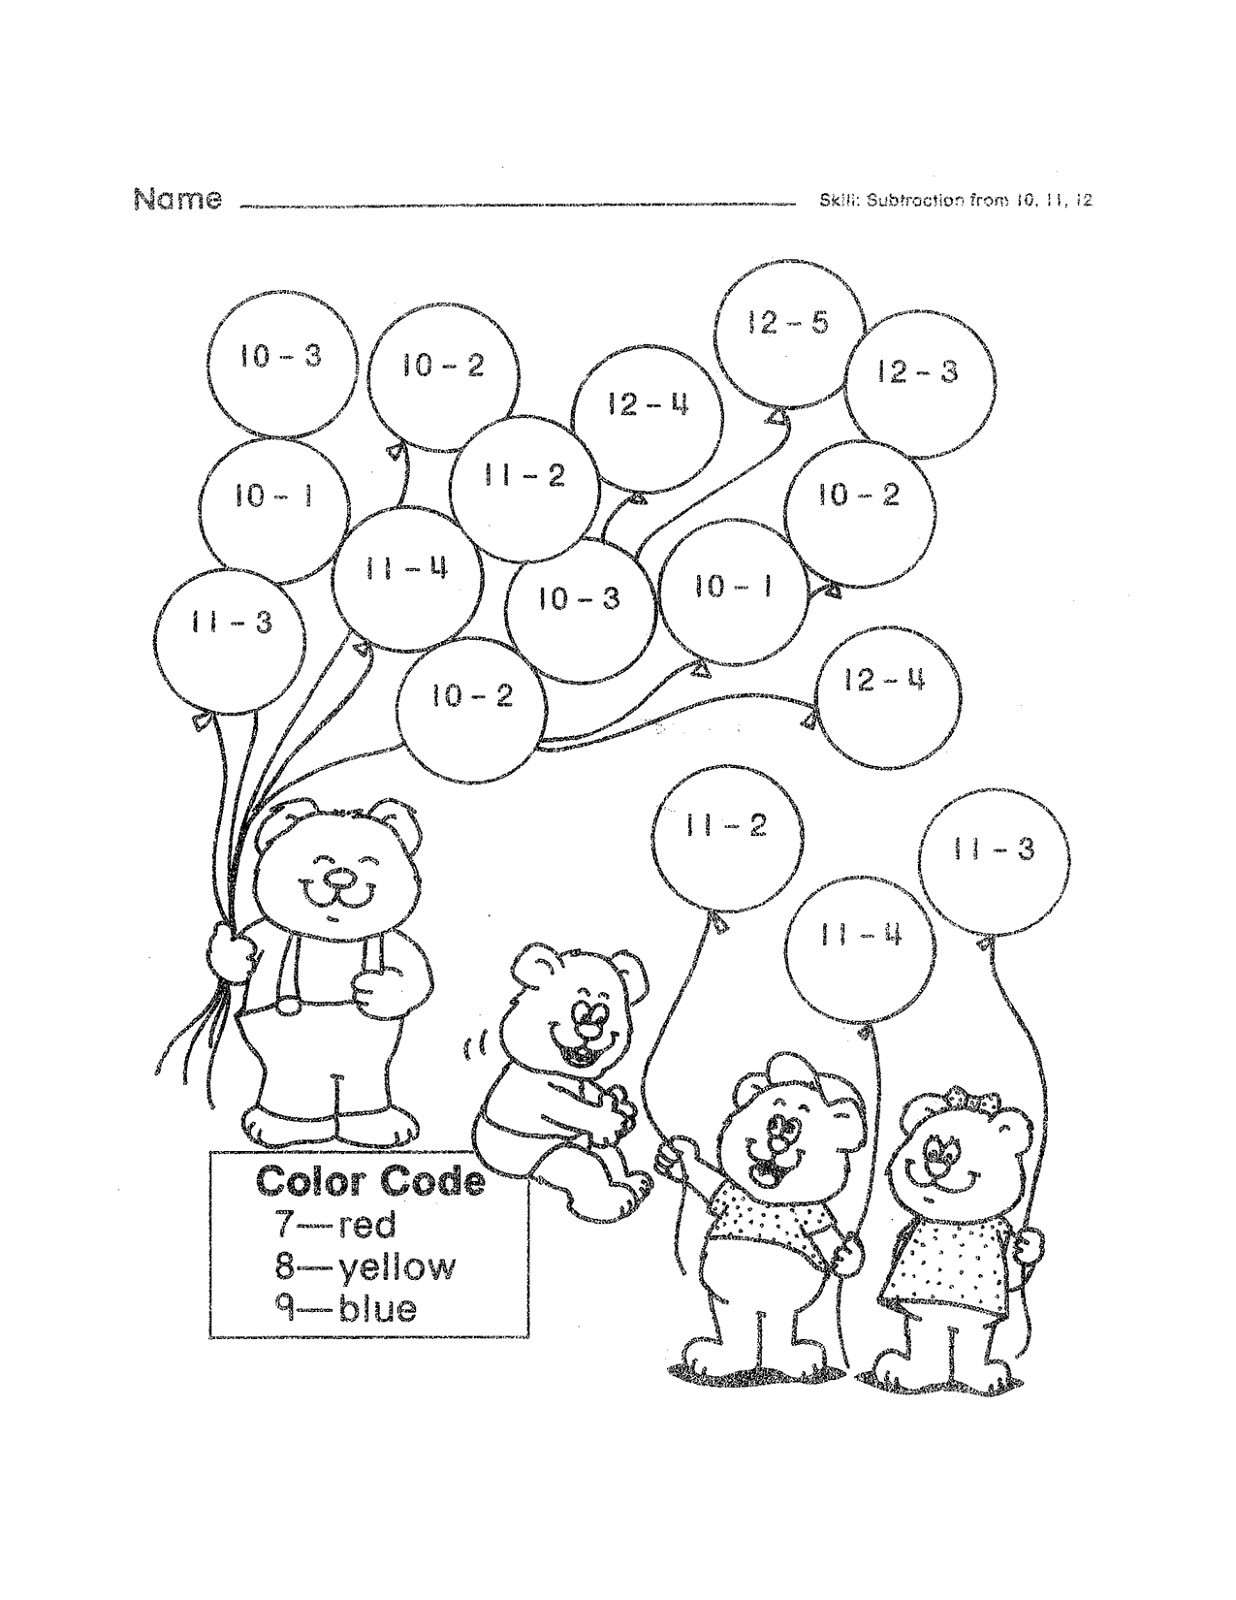 spelling vocabulary 2nd grade writing simple reading prehension questions words with blends 3rd subtraction worksheets year have dream speech pdf singular and plural nouns first